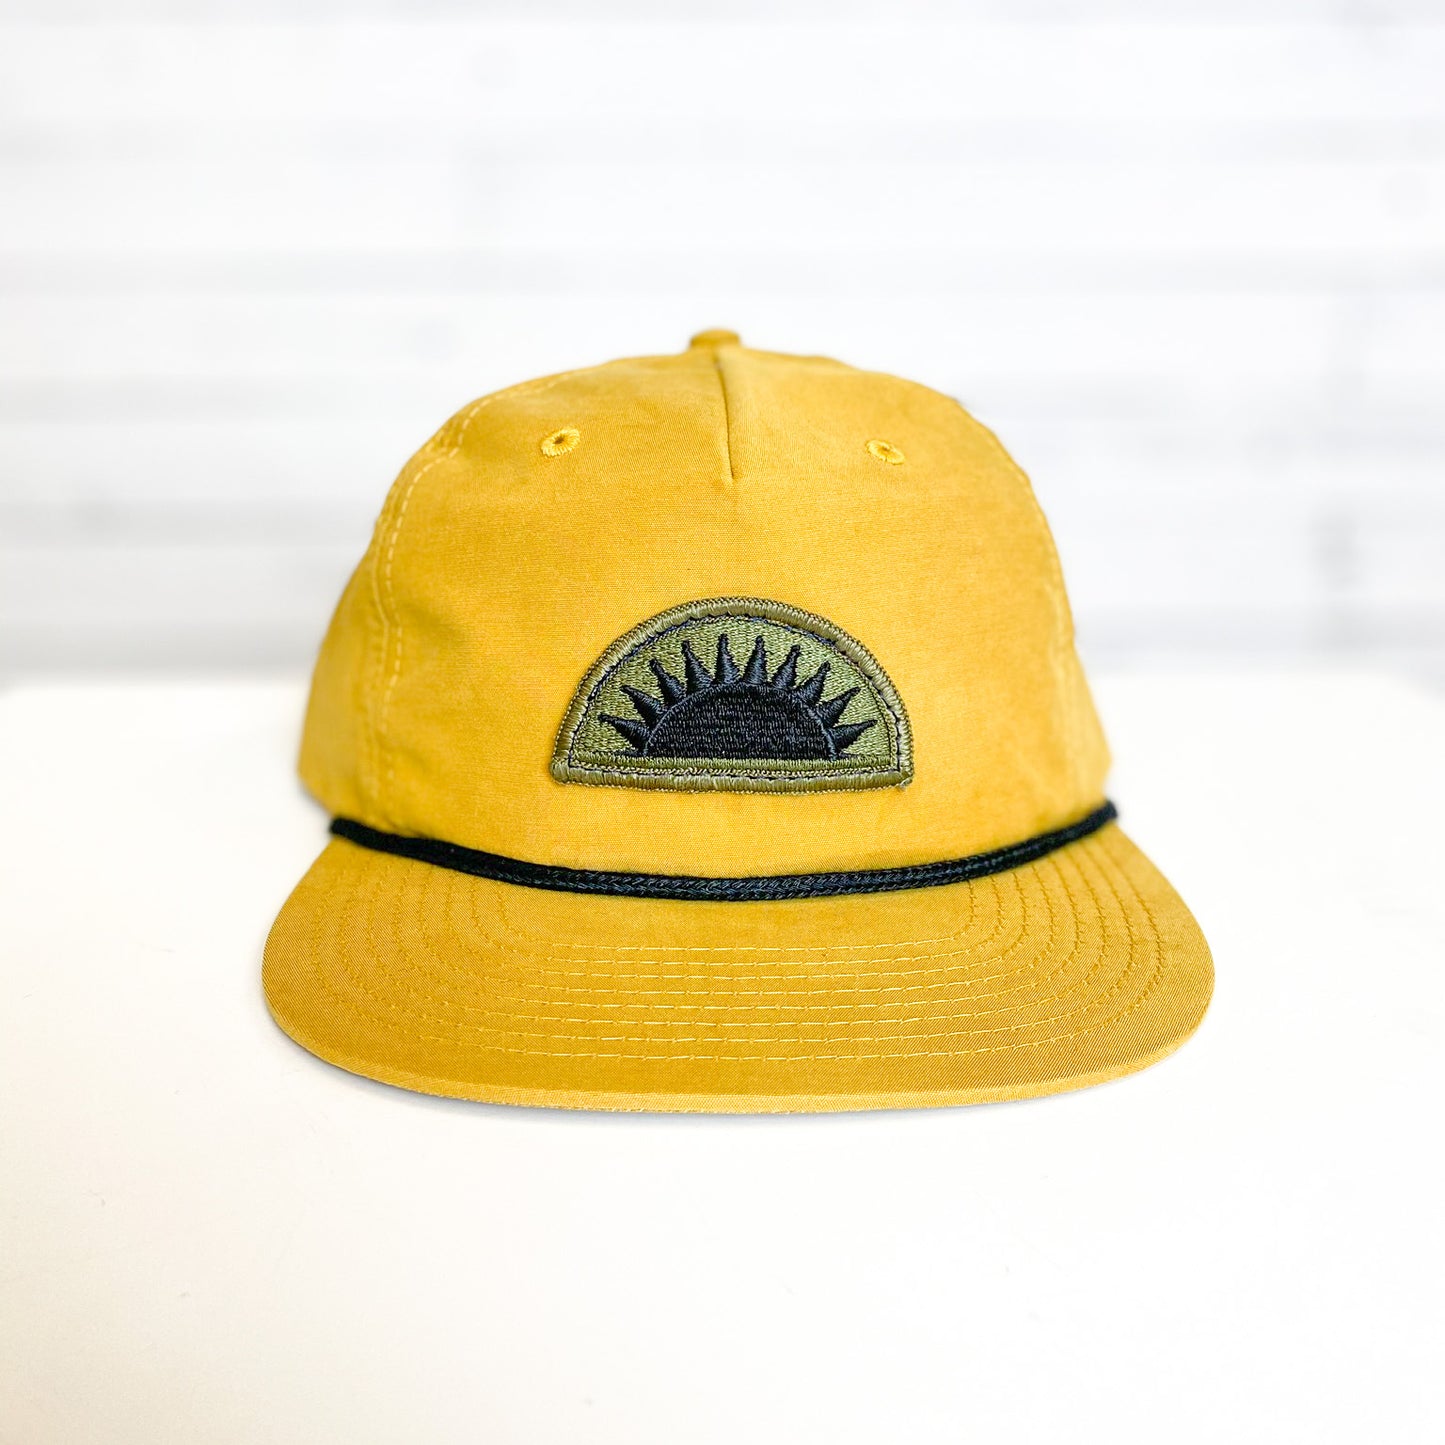 Vintage Military Patch Mustard Hat